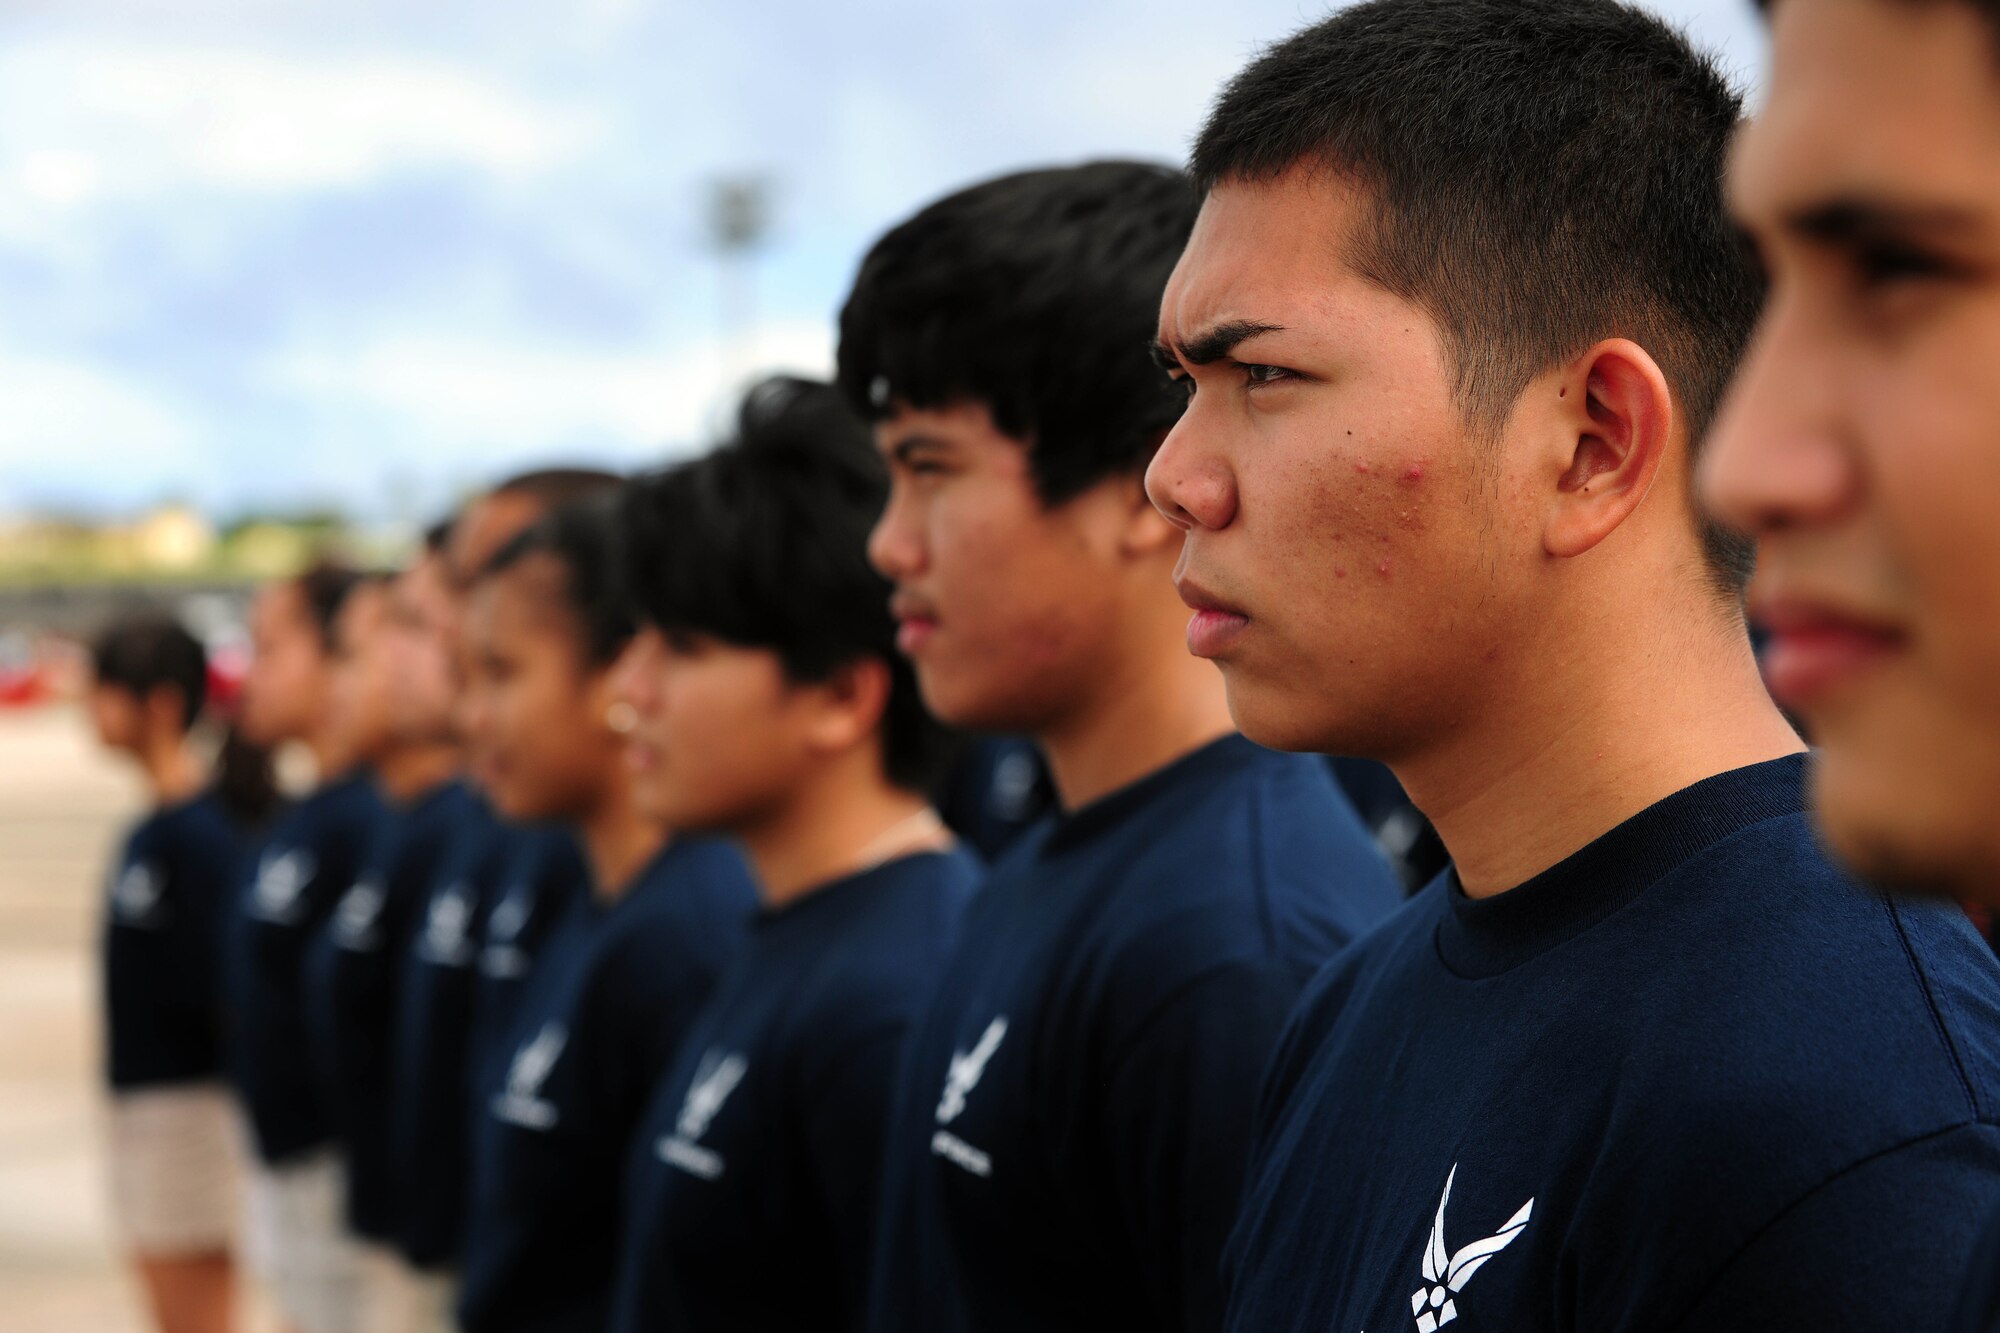 ANDERSEN AIR FORCE BASE, Guam - Local high school students from Guam wait patiently before the enlistment ceremony with the Thunderbirds here during Team Andersen Air Show '09 "Air Power Over the Marianas" Oct. 7. The U.S. Air Force Thunderbirds is the premier aerial demonstration team representing Airmen worldwide. Andersen AFB rescheduled its air show for after cancelling it due to Typhoon Melor.  The air show was held primarily to thank the residents of Guam for their continued support to Andersen AFB and the rest of the U.S. Air Force. (U.S. Air Force photo by Airman 1st Class Courtney Witt)
